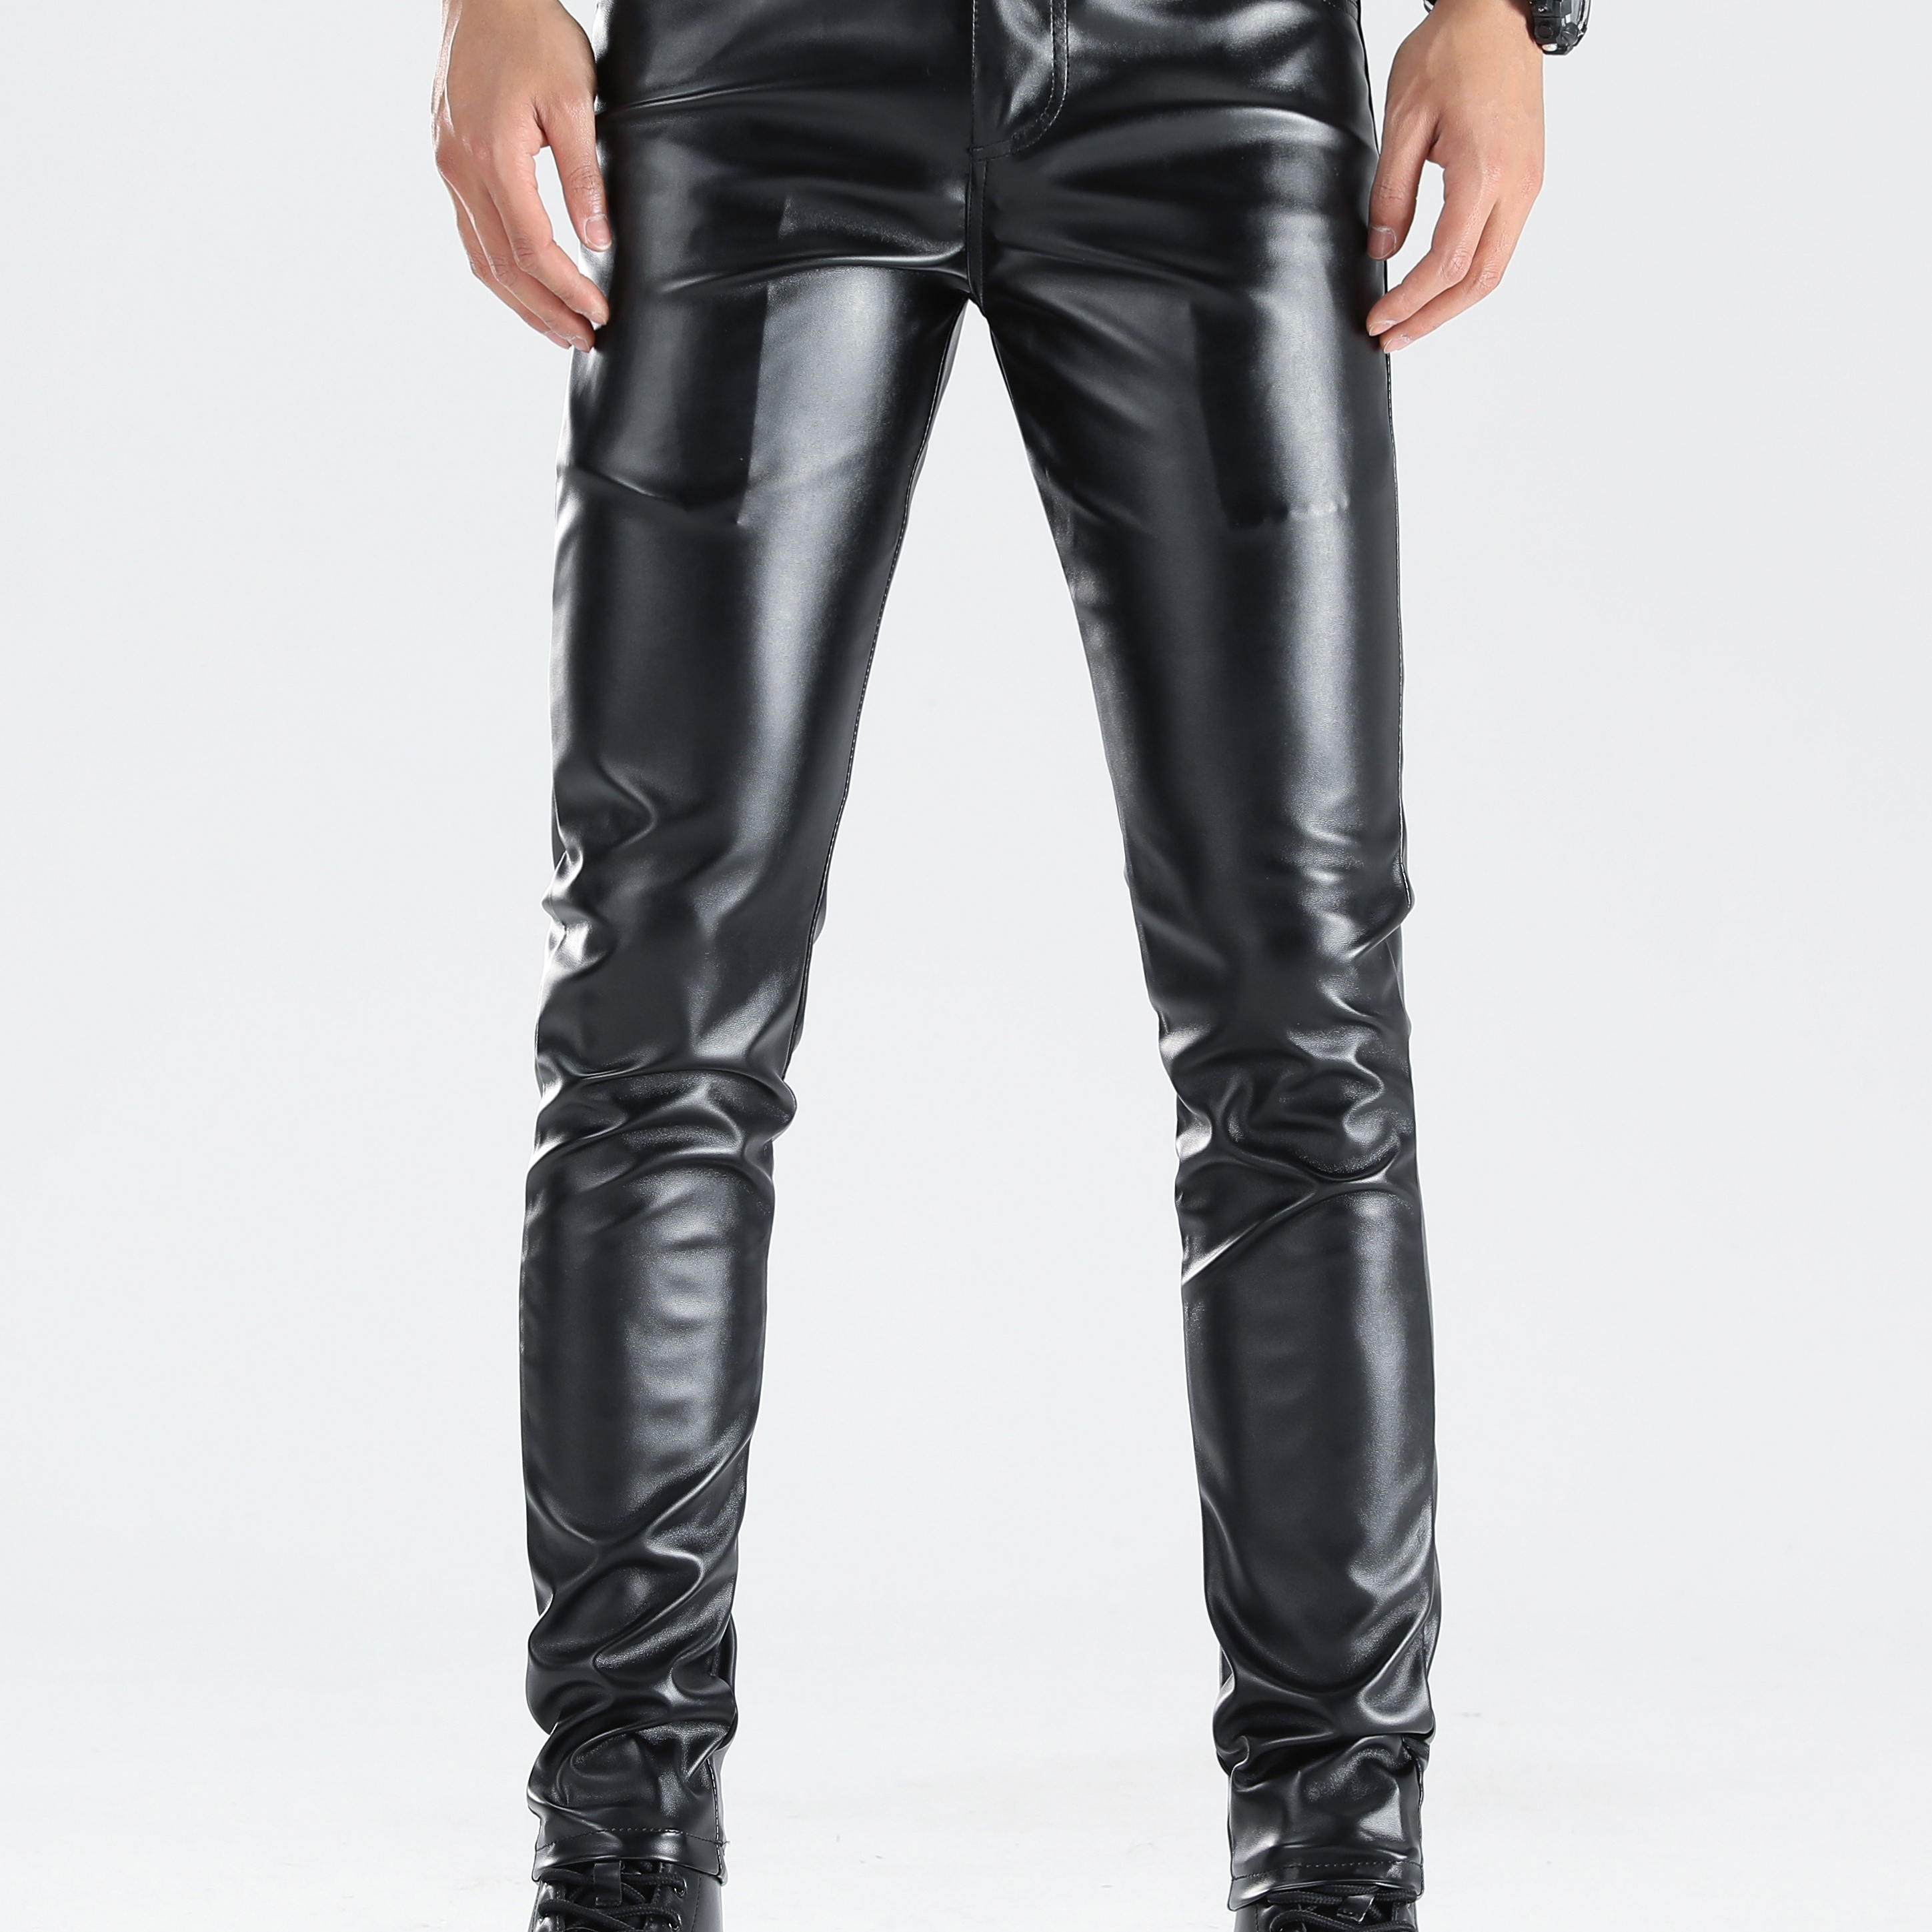 

Men's Chic Pu Pants, Casual Slim Fit Medium Stretch Faux Leather Biker Pants For Spring Fall K-pop